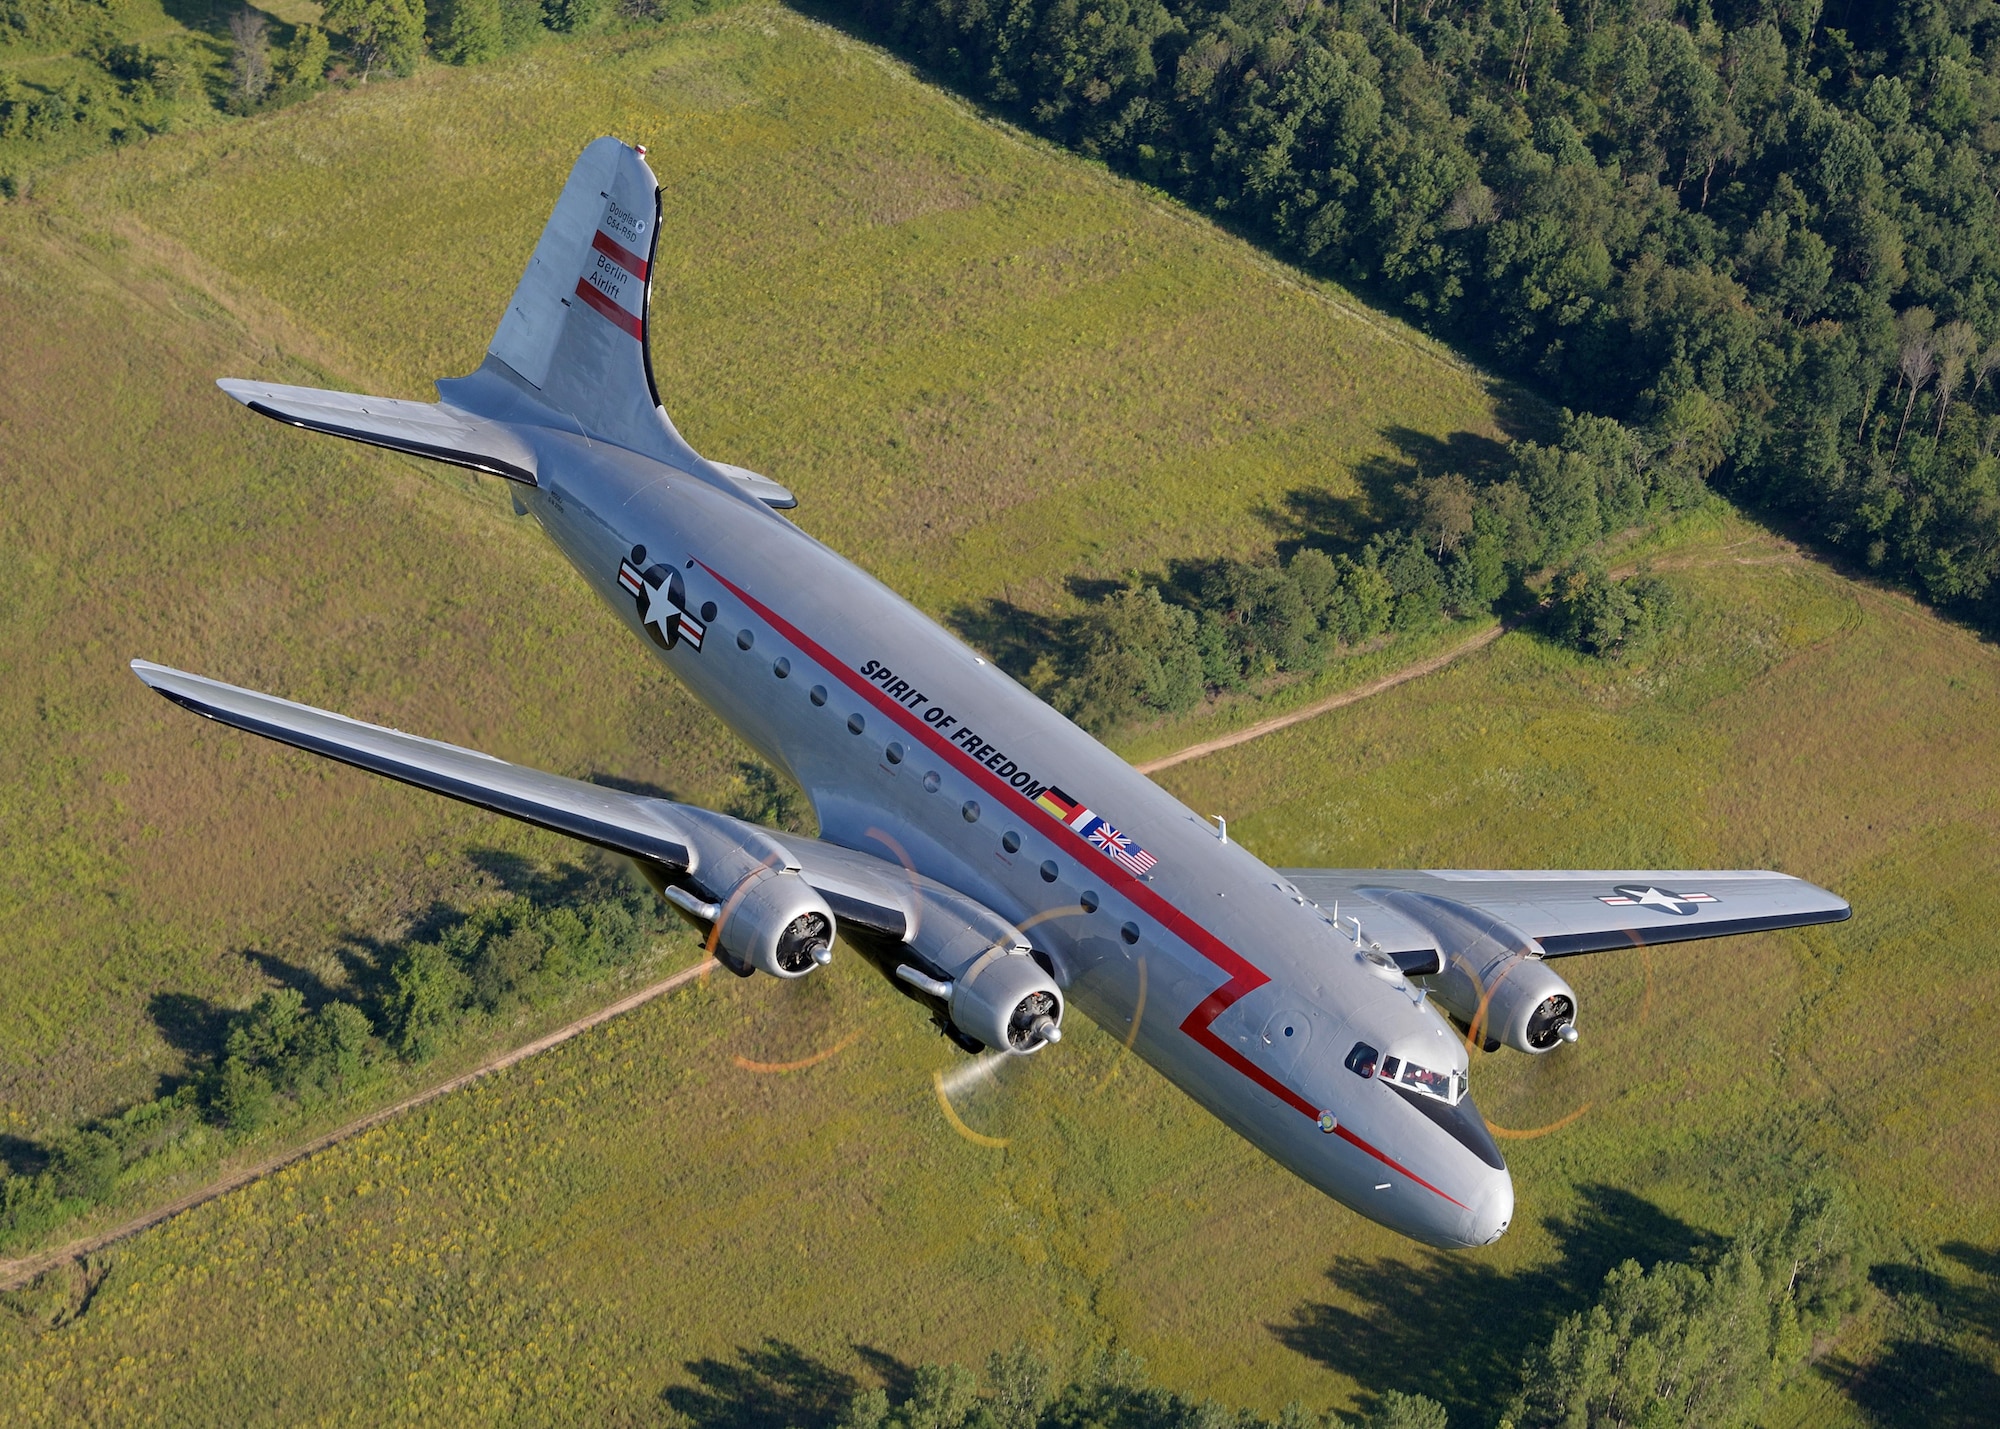 C-54 'Spirit of Freedom' in-flight during a training mission near Warsaw, Indiana in August 2014. The aircraft is owned and operated by the Berlin Airlift Historical Foundation which keeps the aircraft flying and available to the public through important educational outreach and air show appearances. Photo courtesy Greg Morehead.